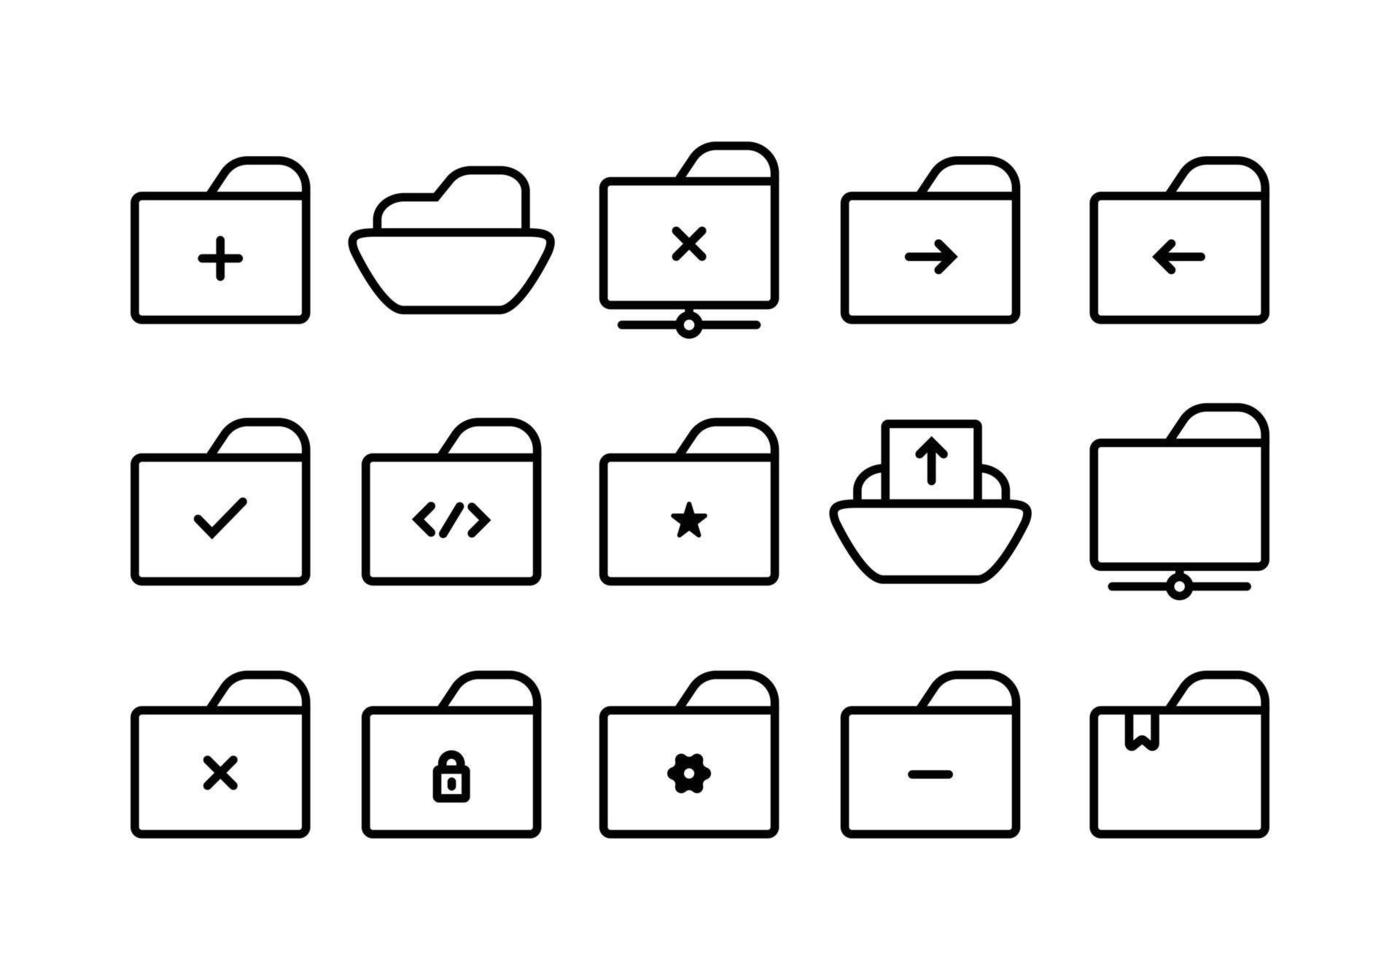 set of folders related icons for the organized interface. editable stroke icon for ui of storage websites or applications. customizable folder icon collection in flat line style. vector